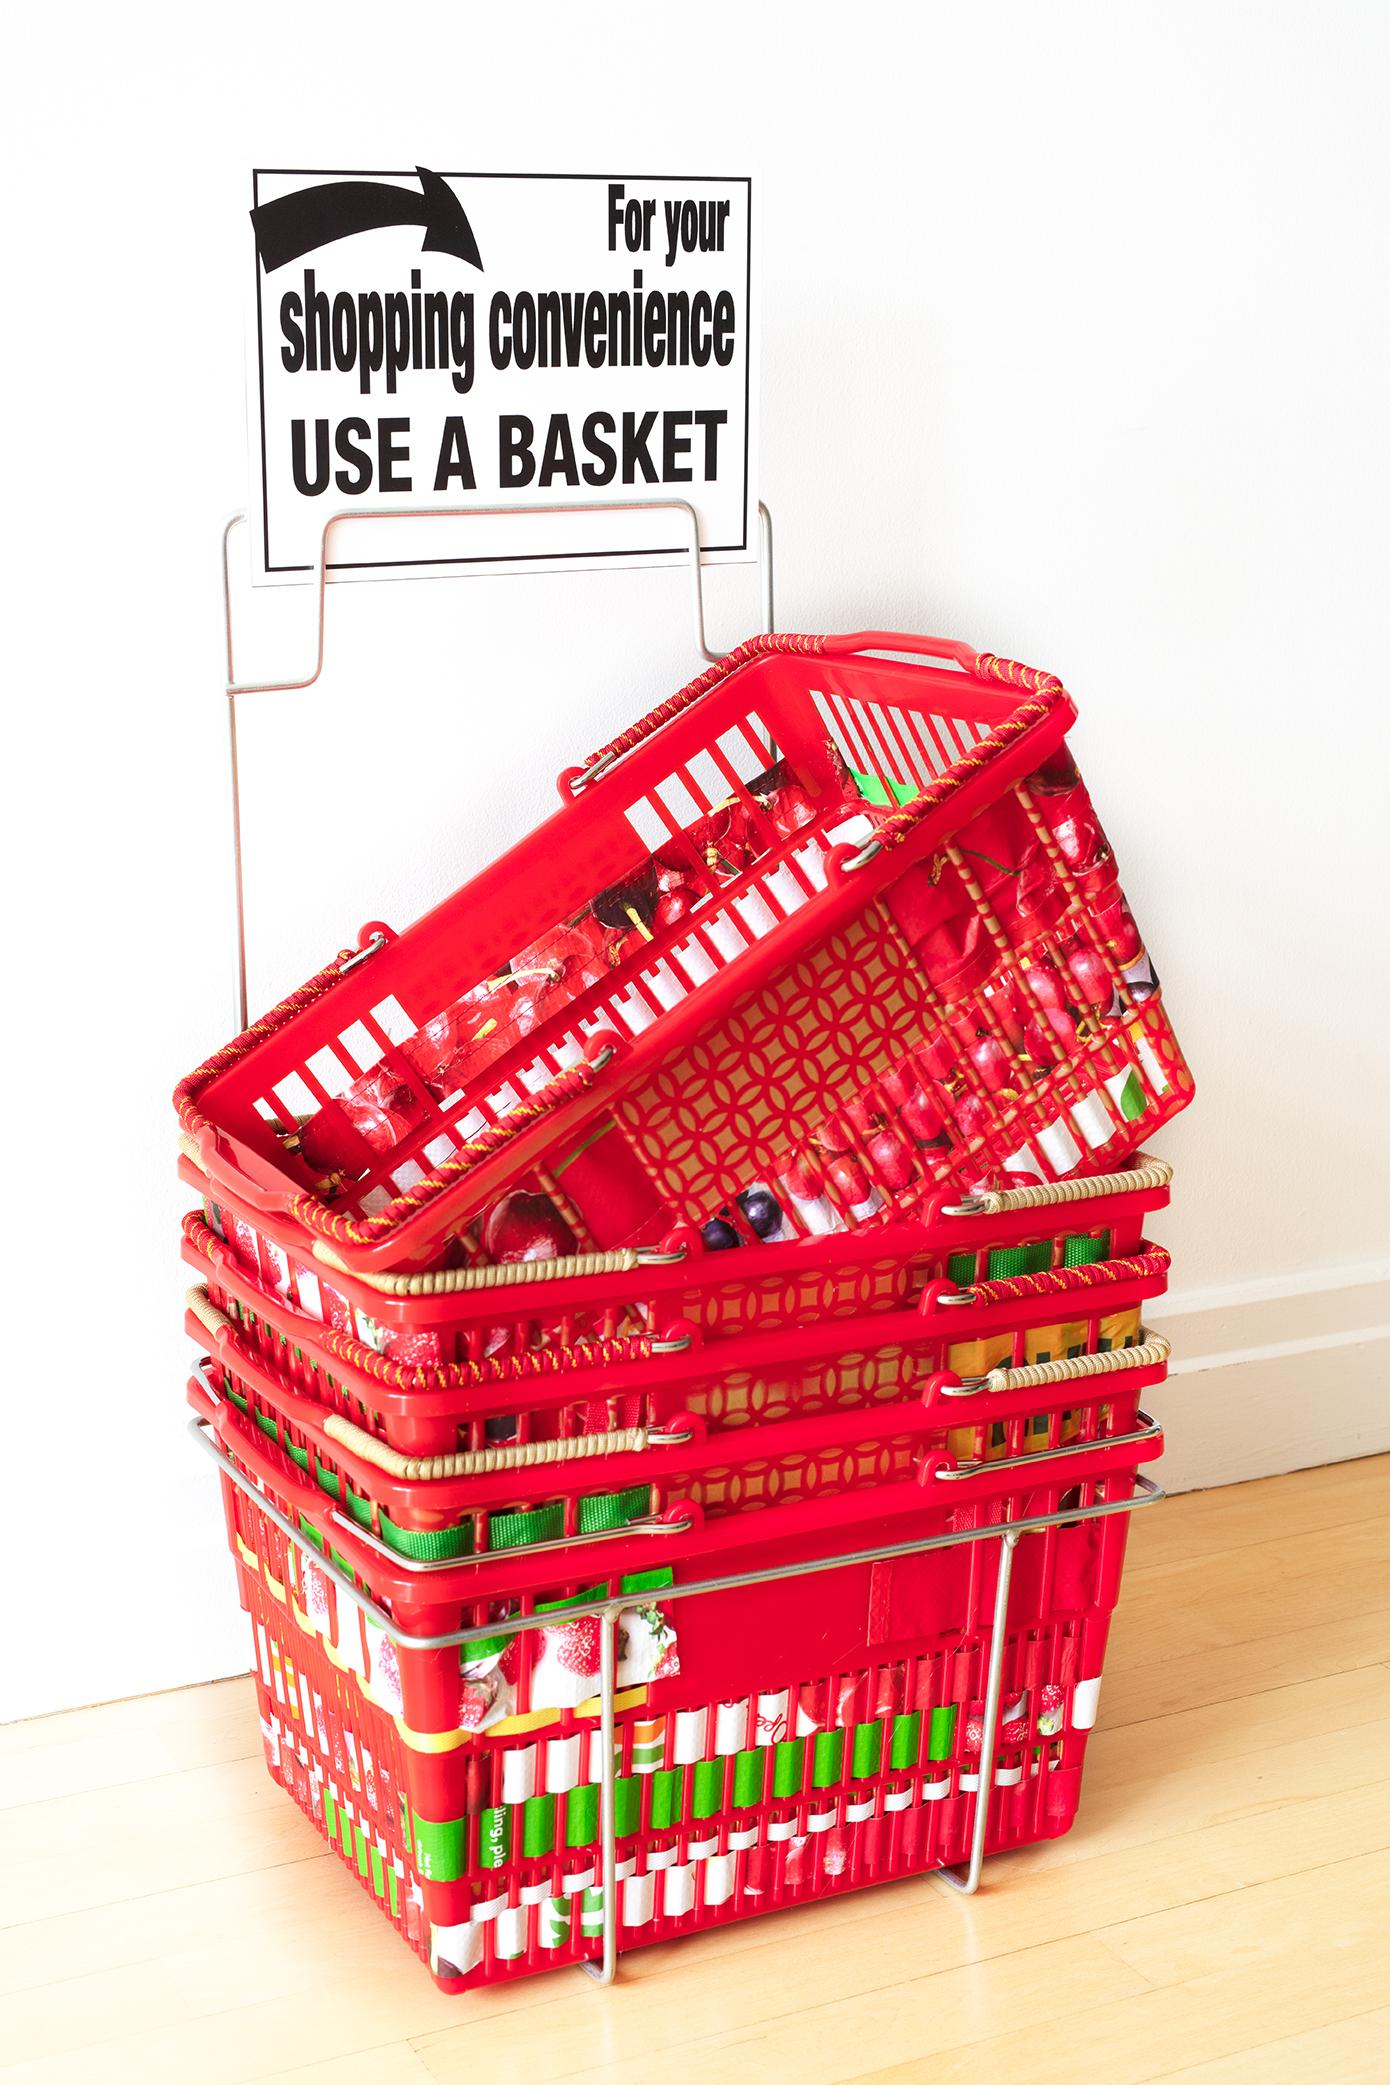 Large Sculpture: 'For Your Convenience, USE A BASKET'